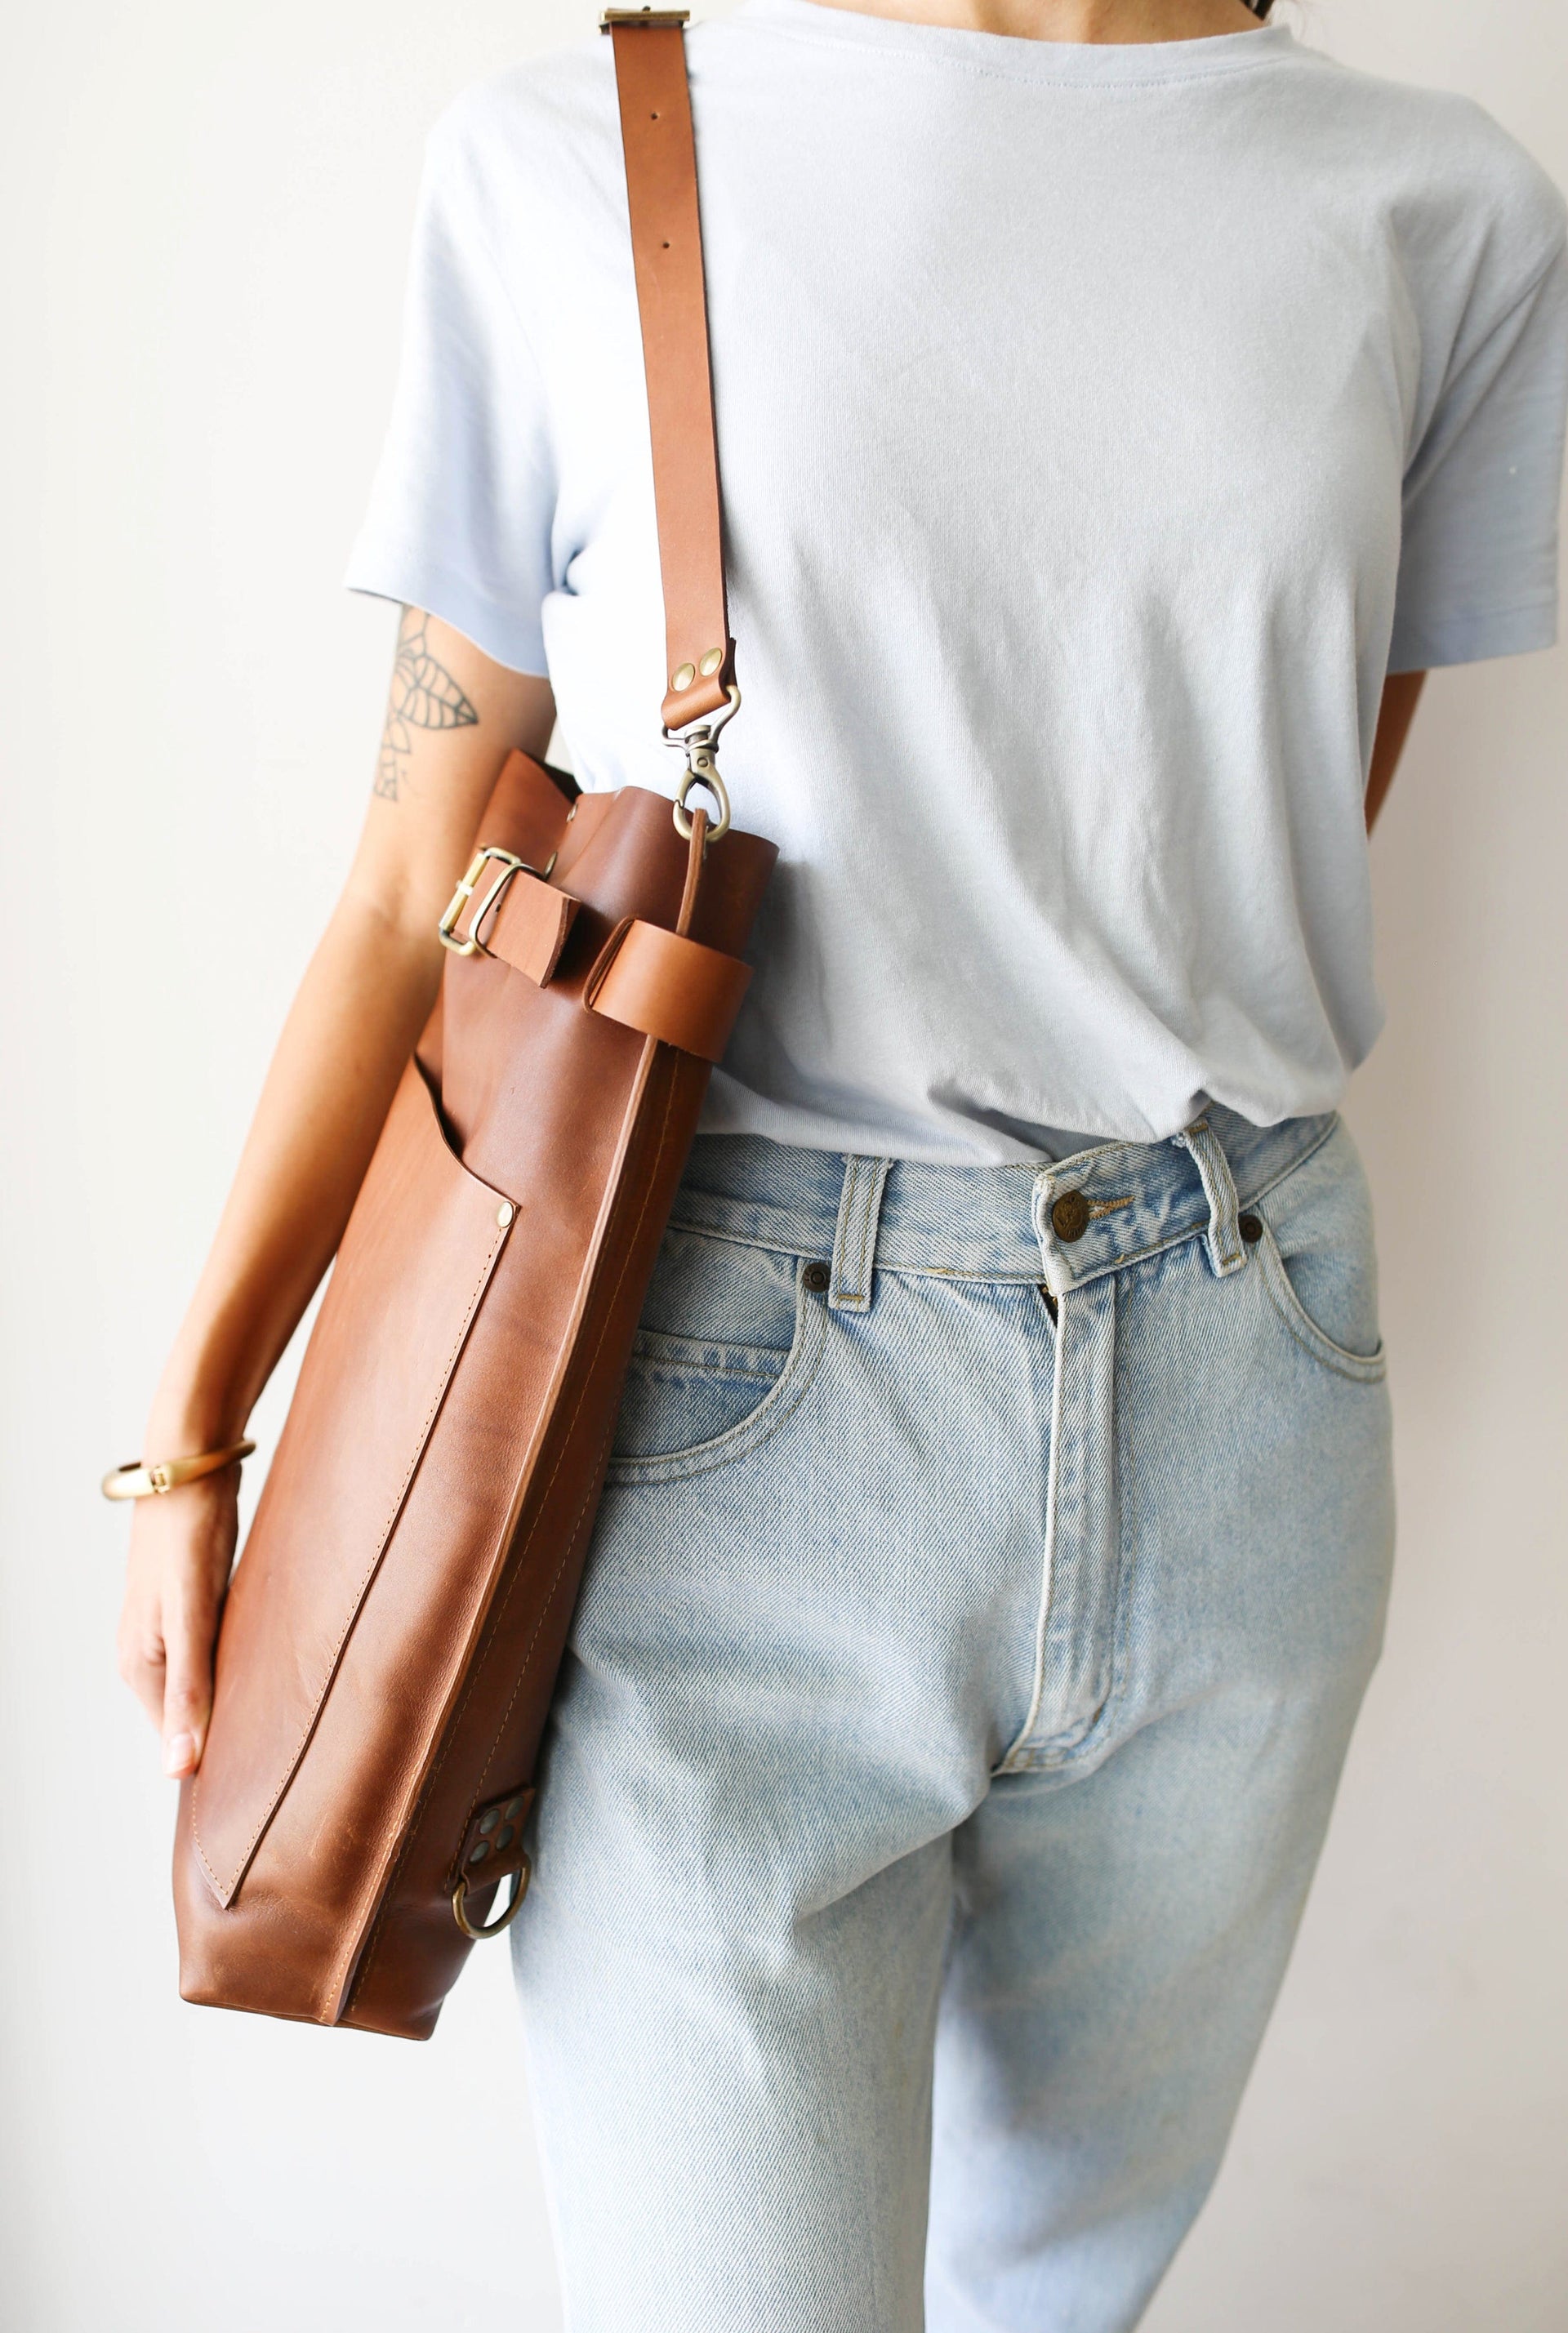 Brown Leather Large crossbody pocket